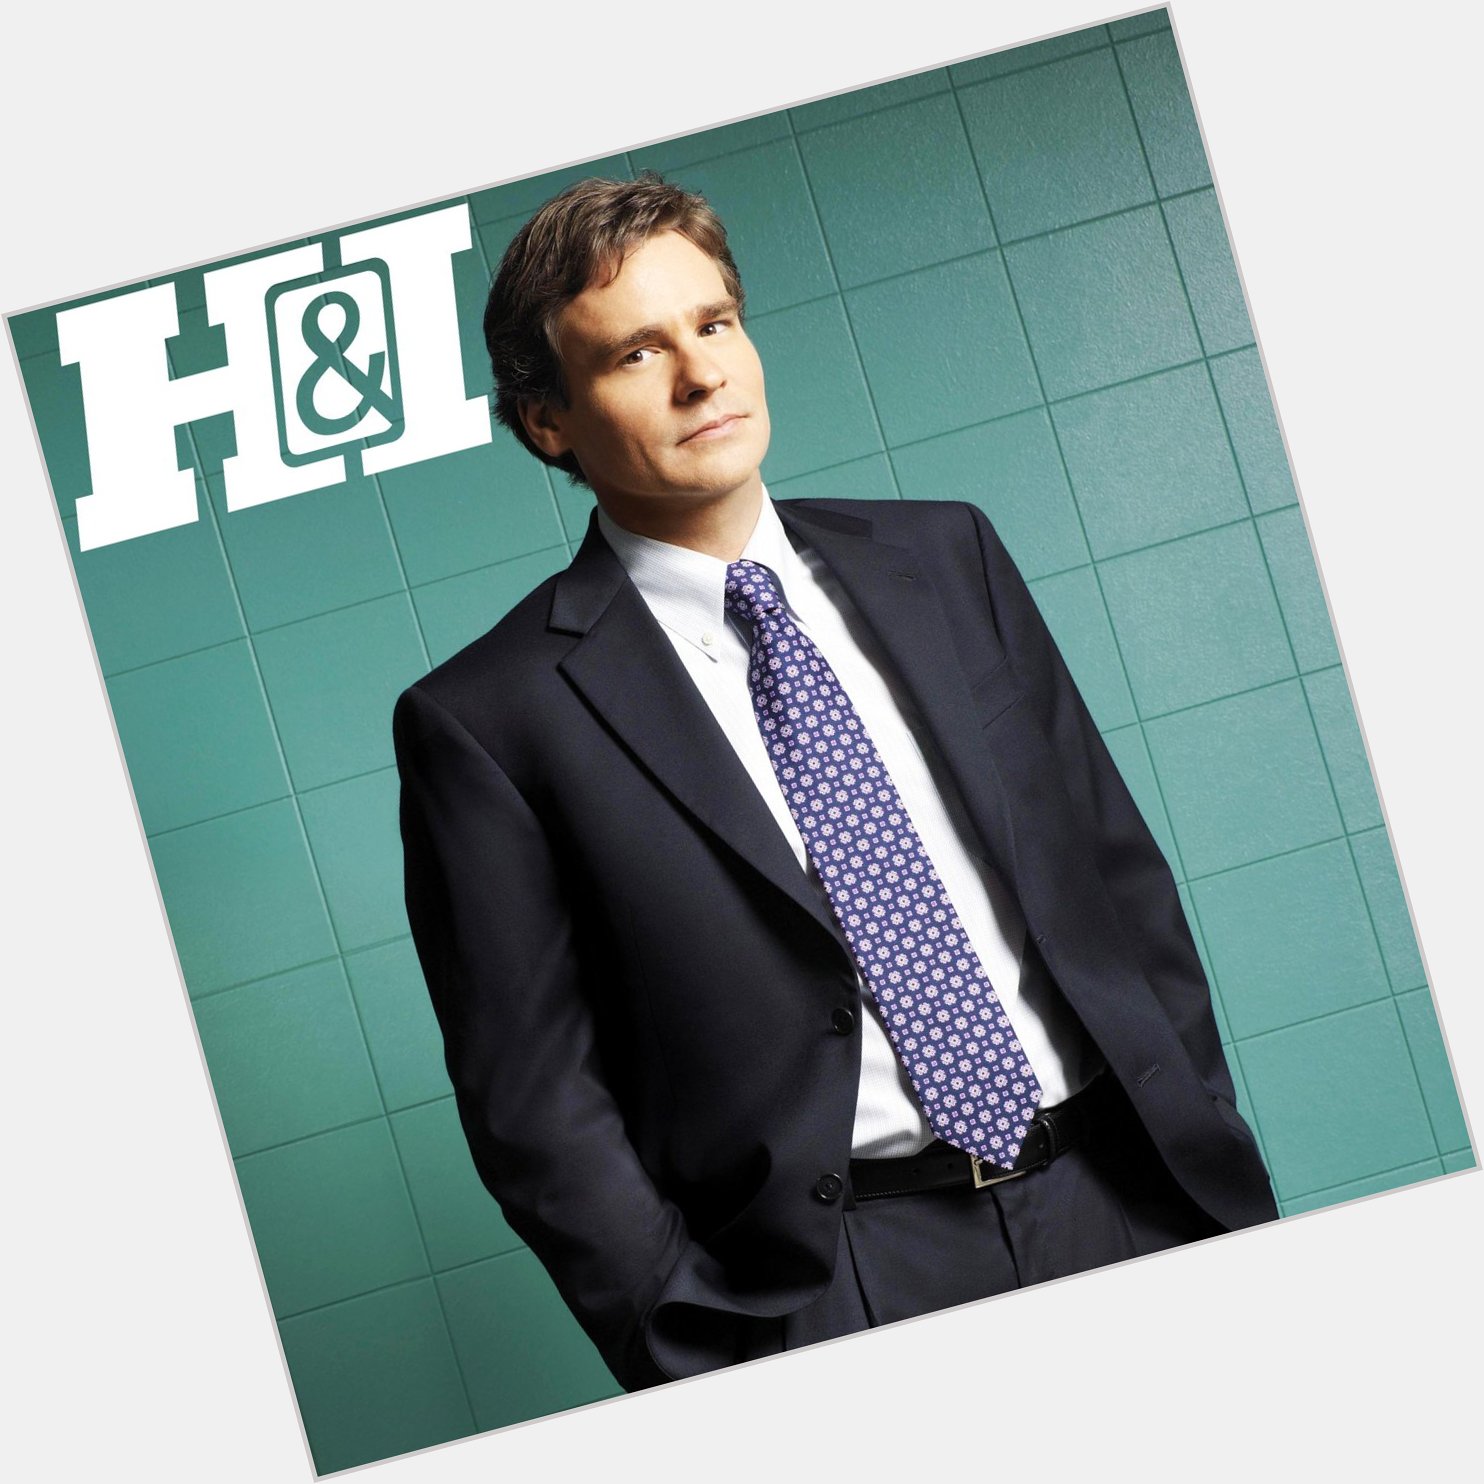 Happy 50th Birthday Robert Sean Leonard! Who is the House to your Winston or vice versa? 